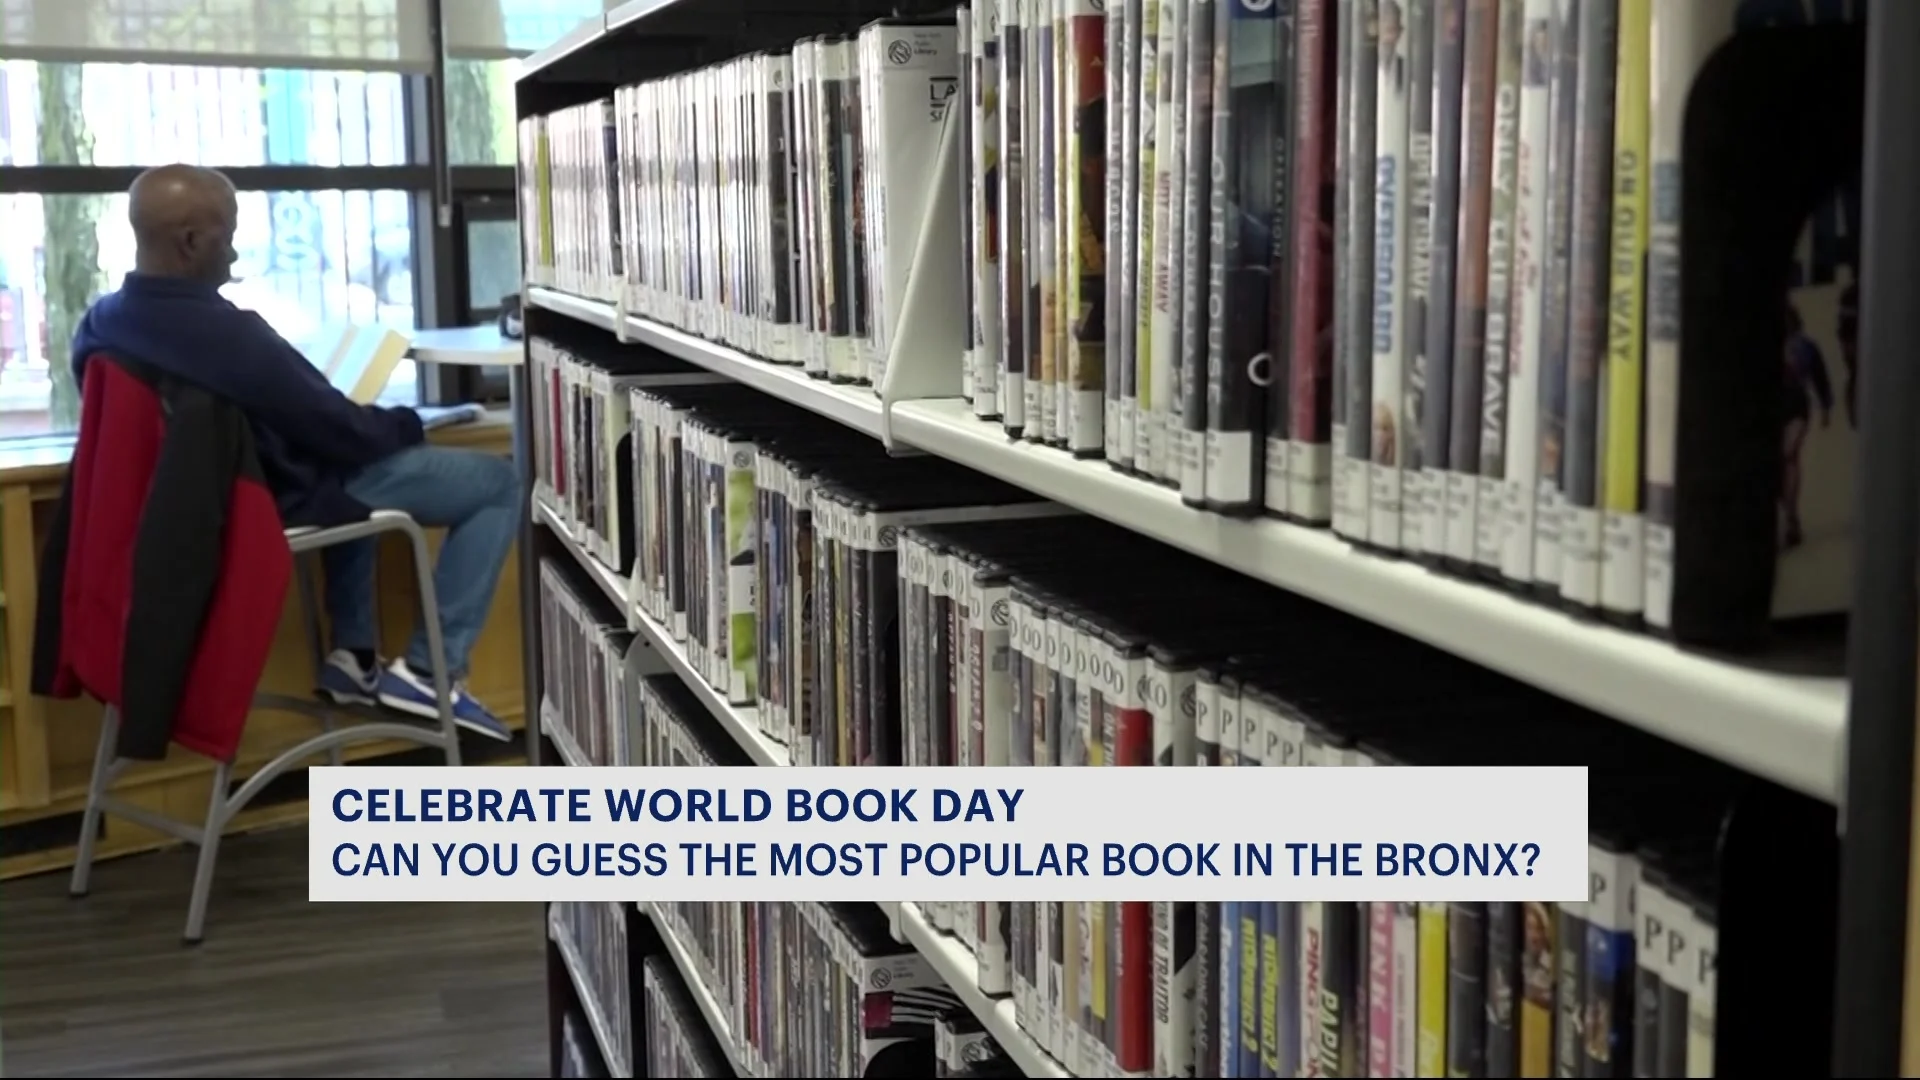 Celebrating World Book Day: Marissa Morales’ Writing Workshop Empowers Book Enthusiasts in the Bronx